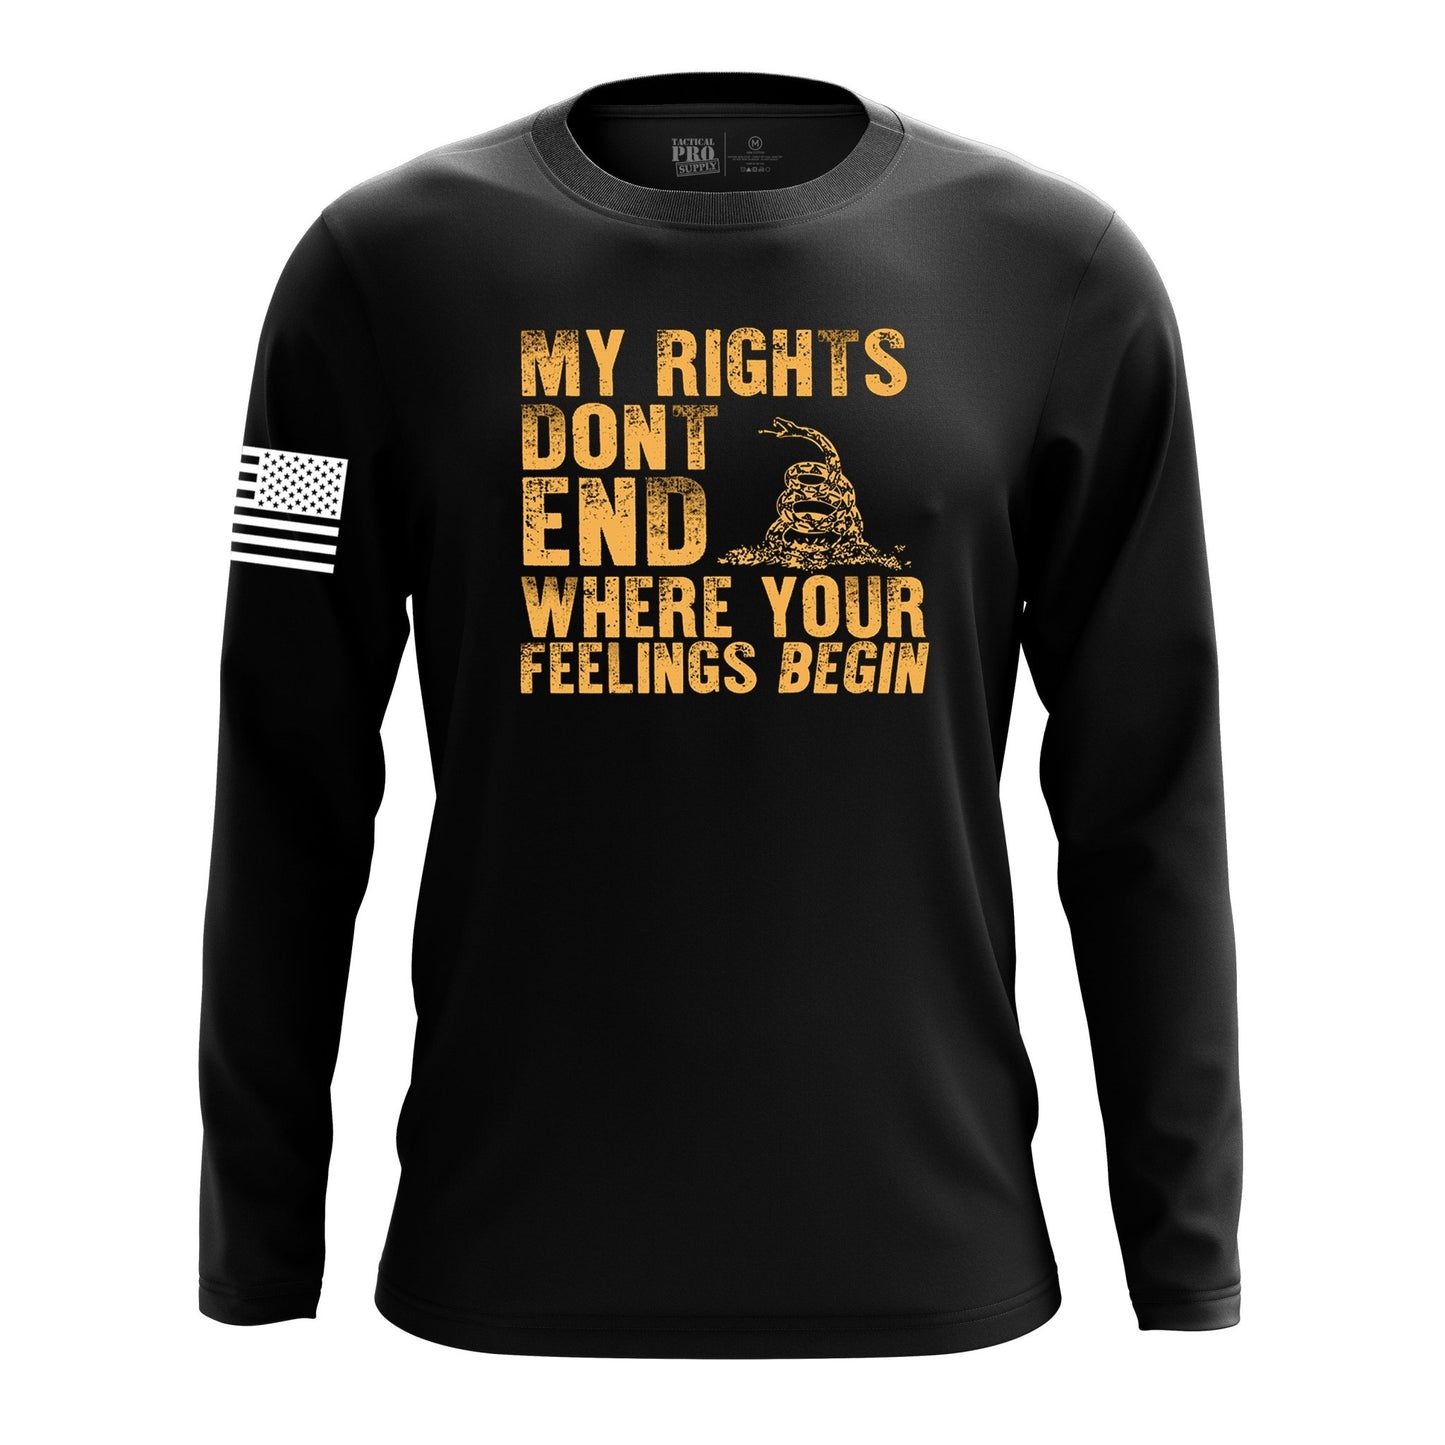 Rights Don't End - Tactical Pro Supply, LLC